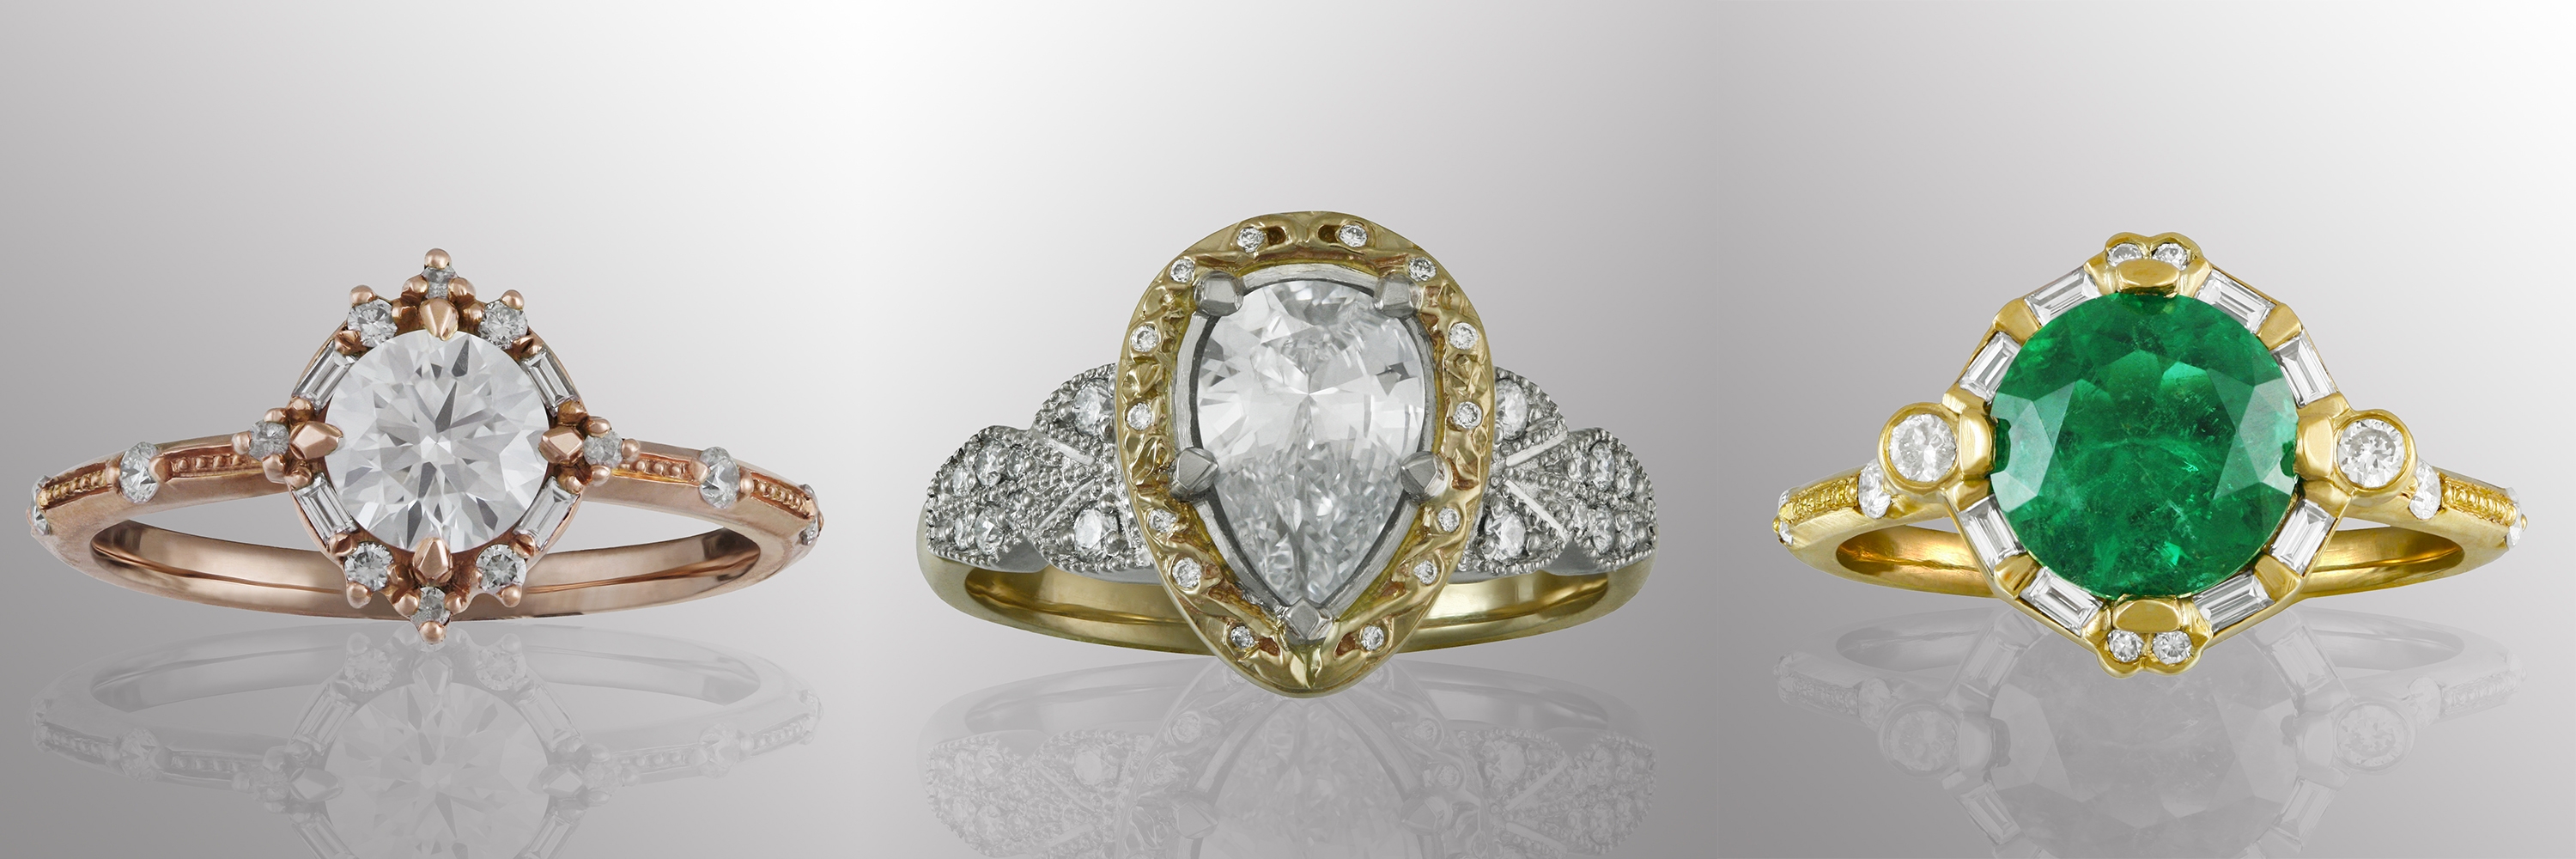 Art Deco-inspired Engagement Rings Made with Baguette, Pear-shaped, and Brilliant-cut Stones